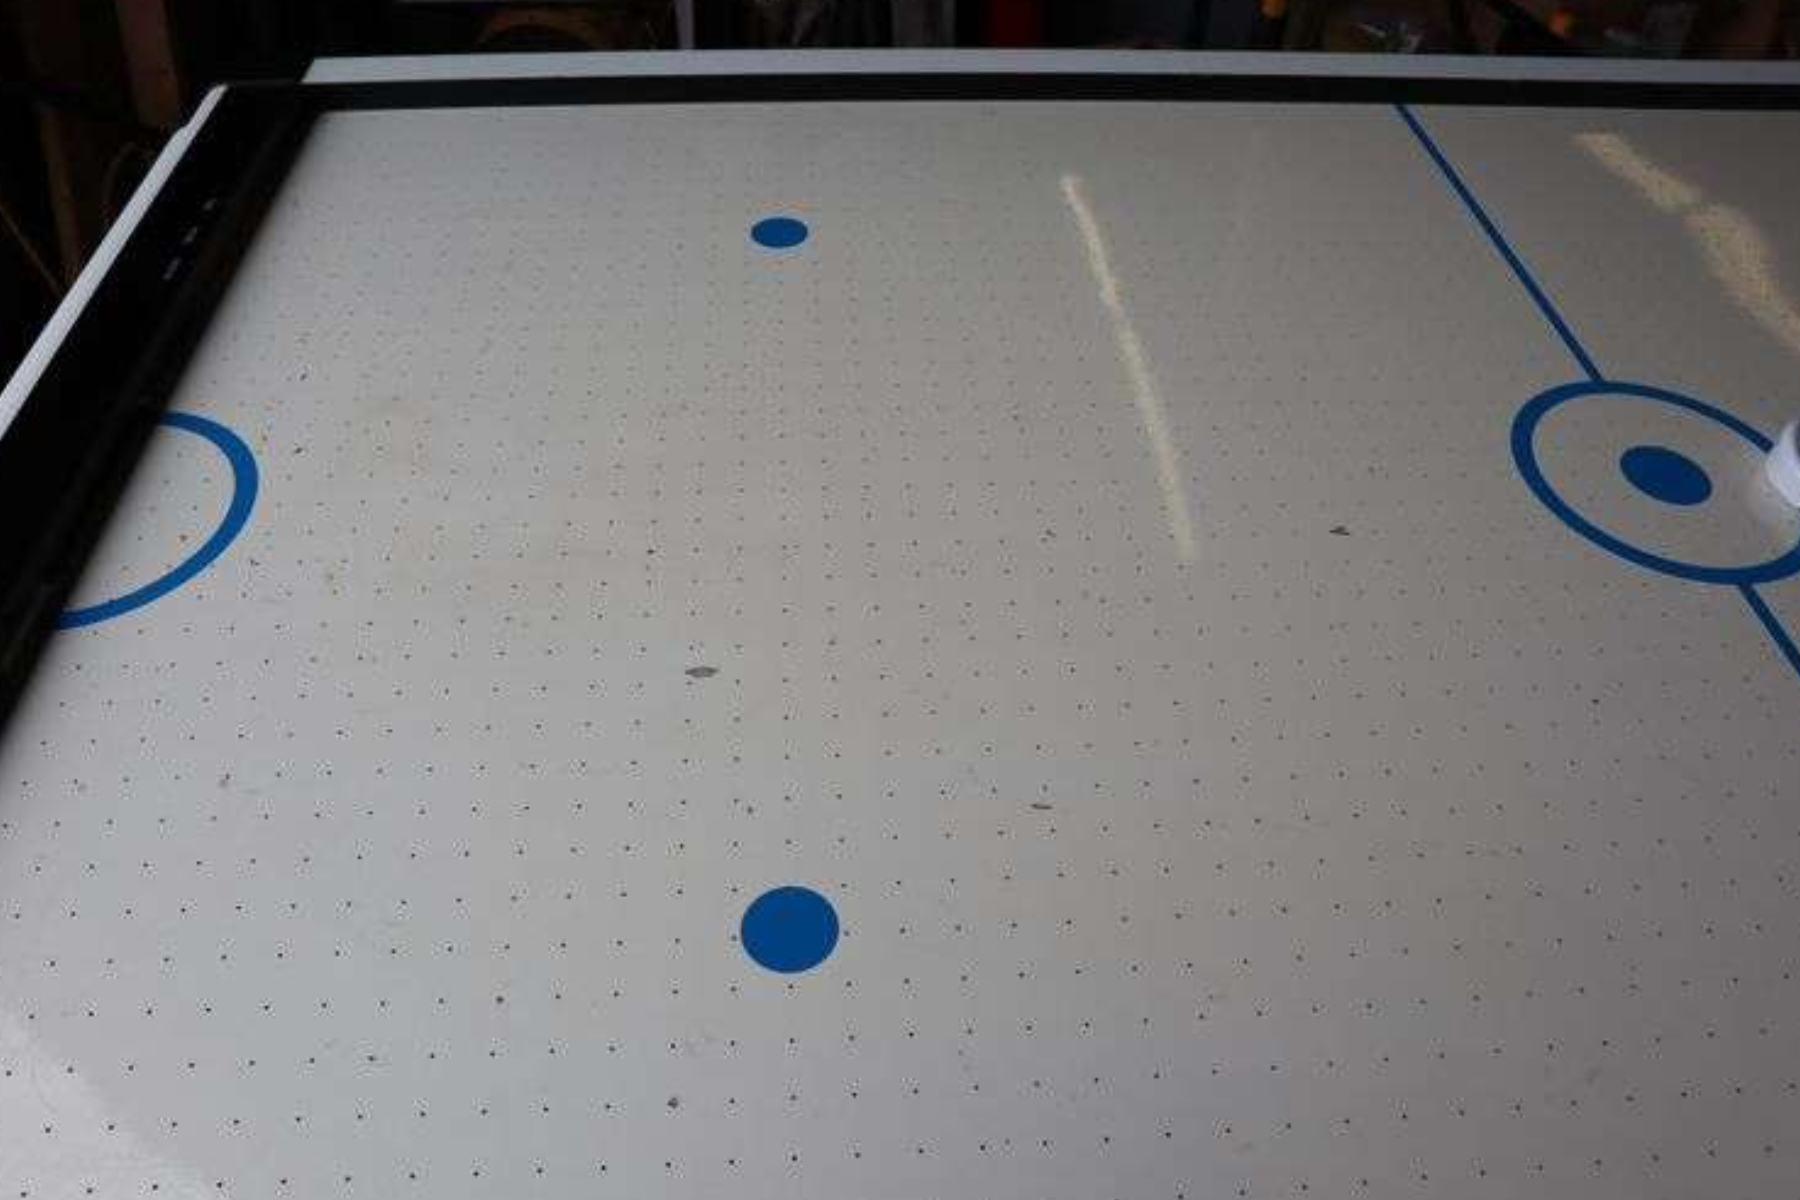 An Air Hockey Table with a damaged playing surface